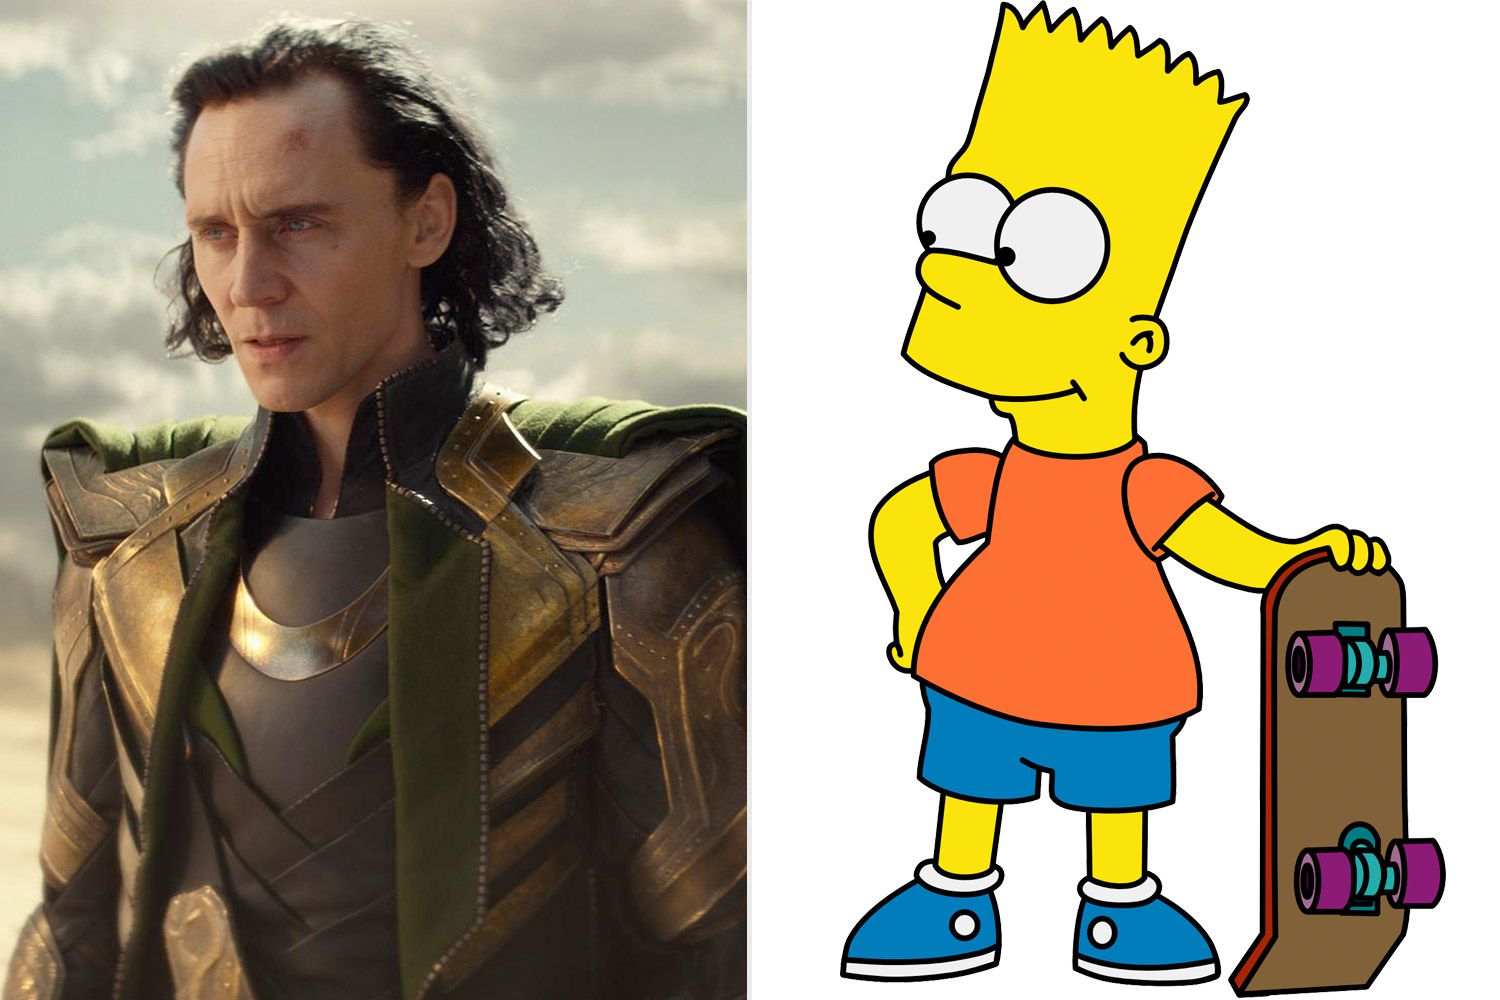 Mavel and The Simpsons team up for Loki-themed short film - Entertainment Weekly News